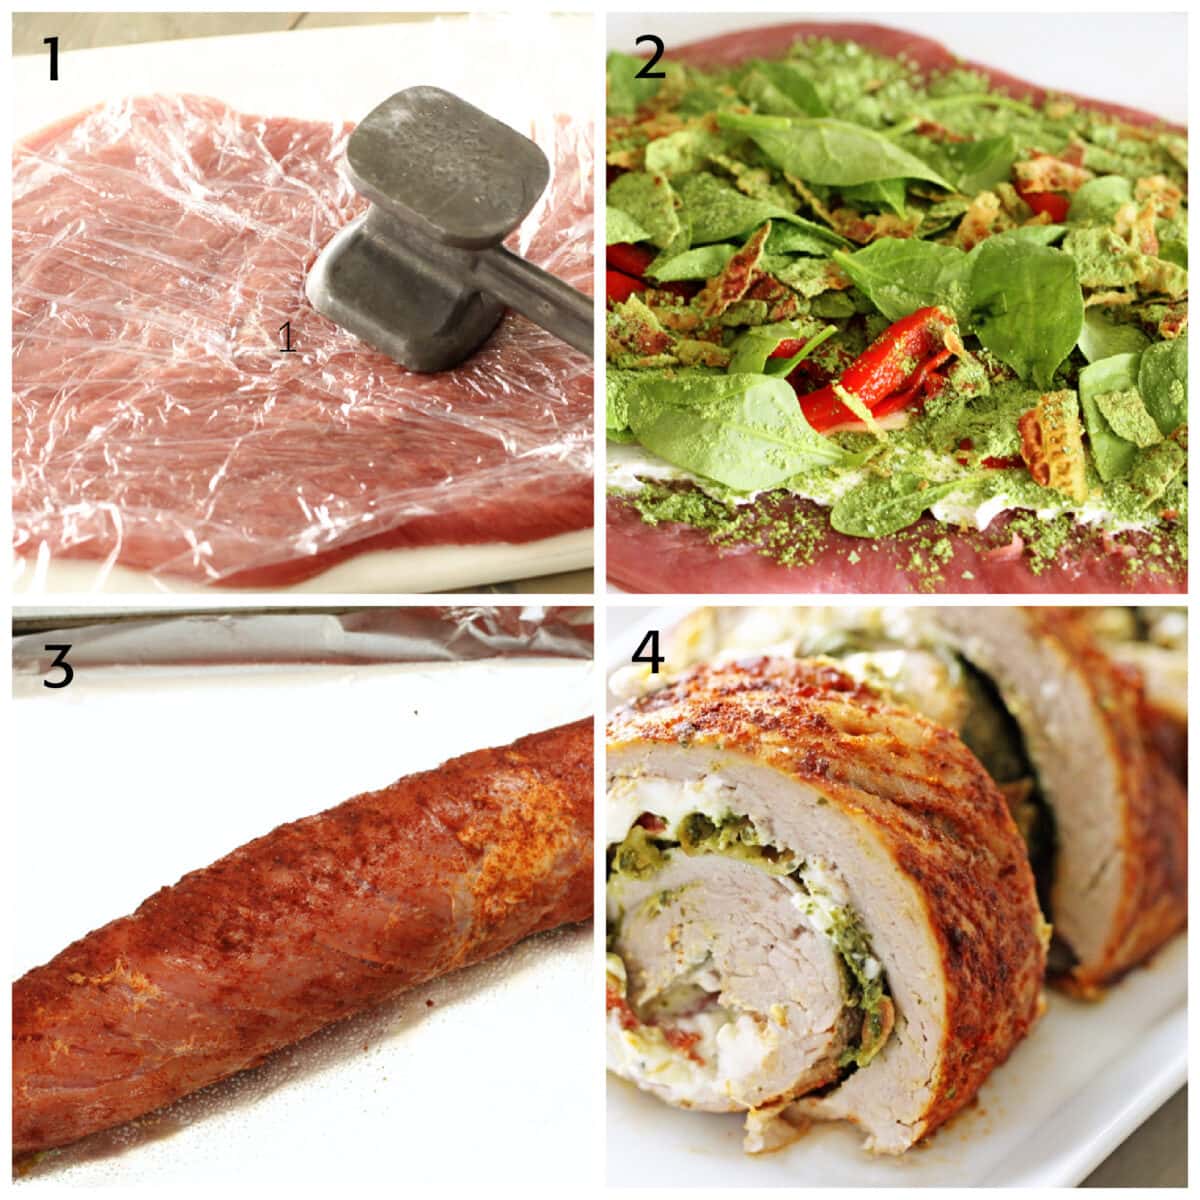 Collage showing 4 steps to making pork stuffed loin